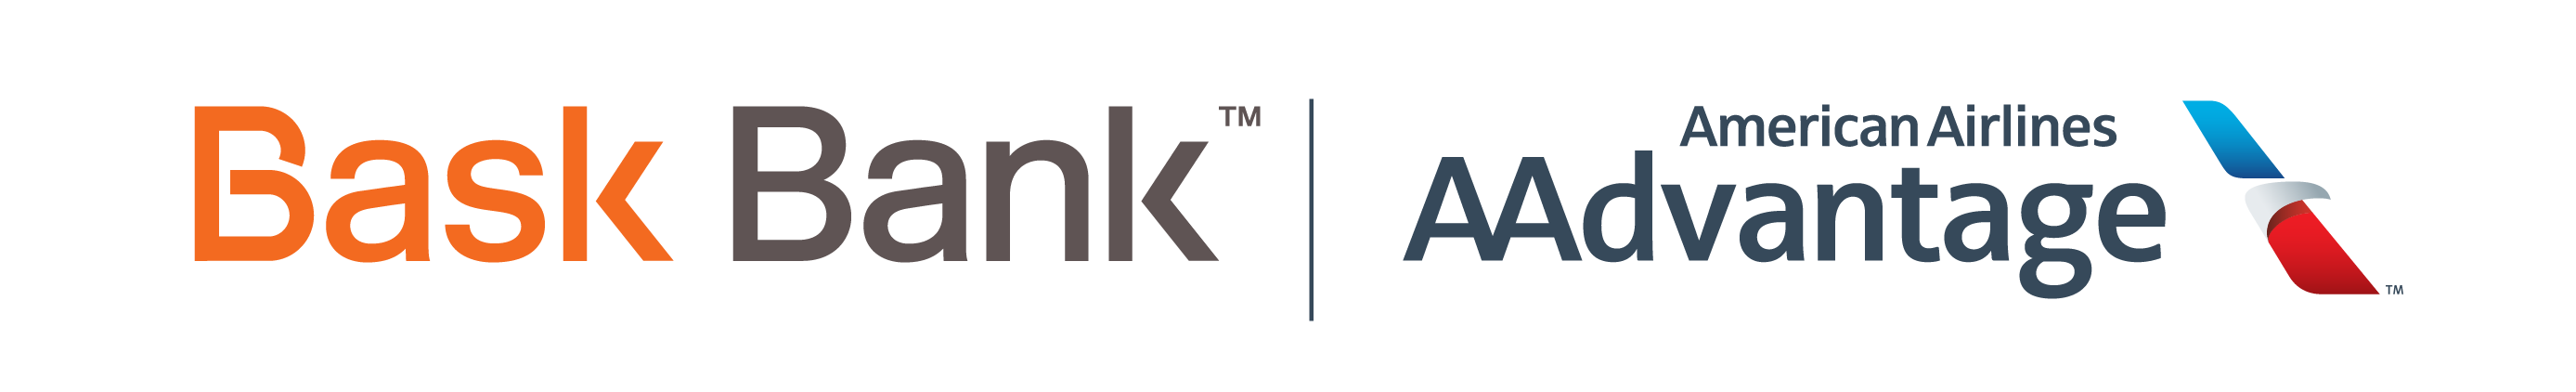 Bask Bank and American Airlines AAdvantage logos